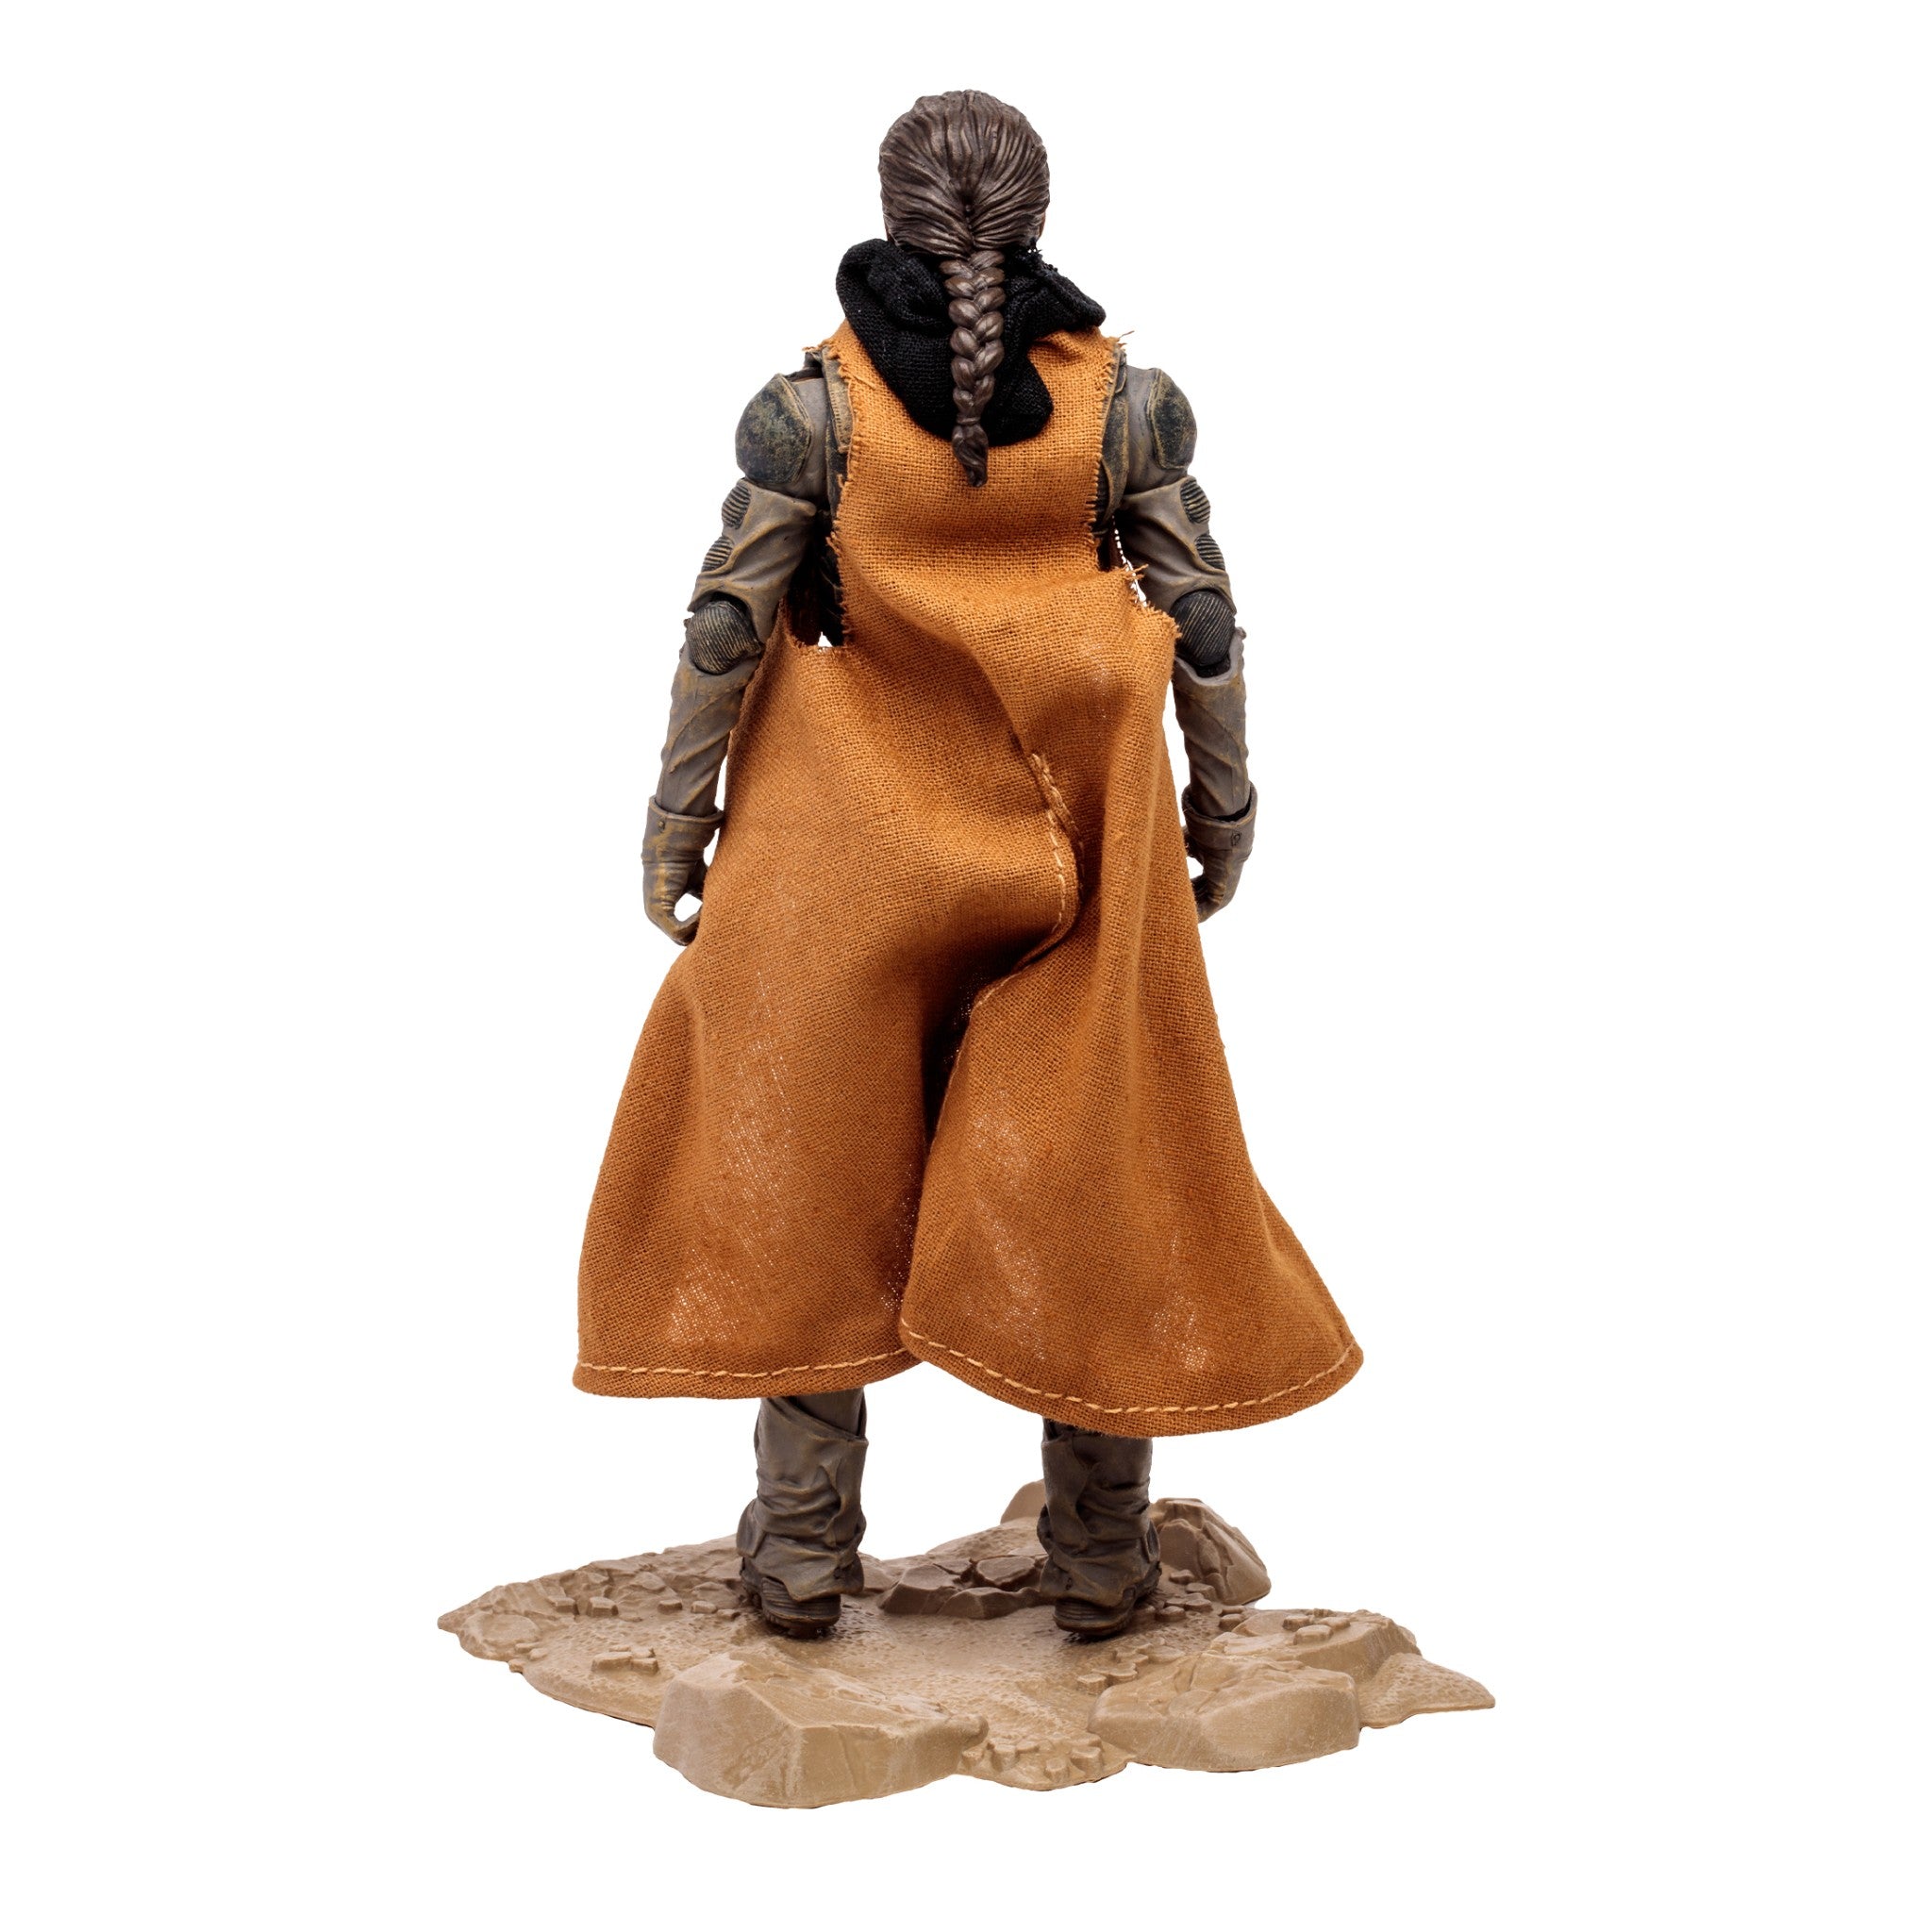 Dune Movie Part Two 2 Chani 7" Action Figure - McFarlane Toys-4